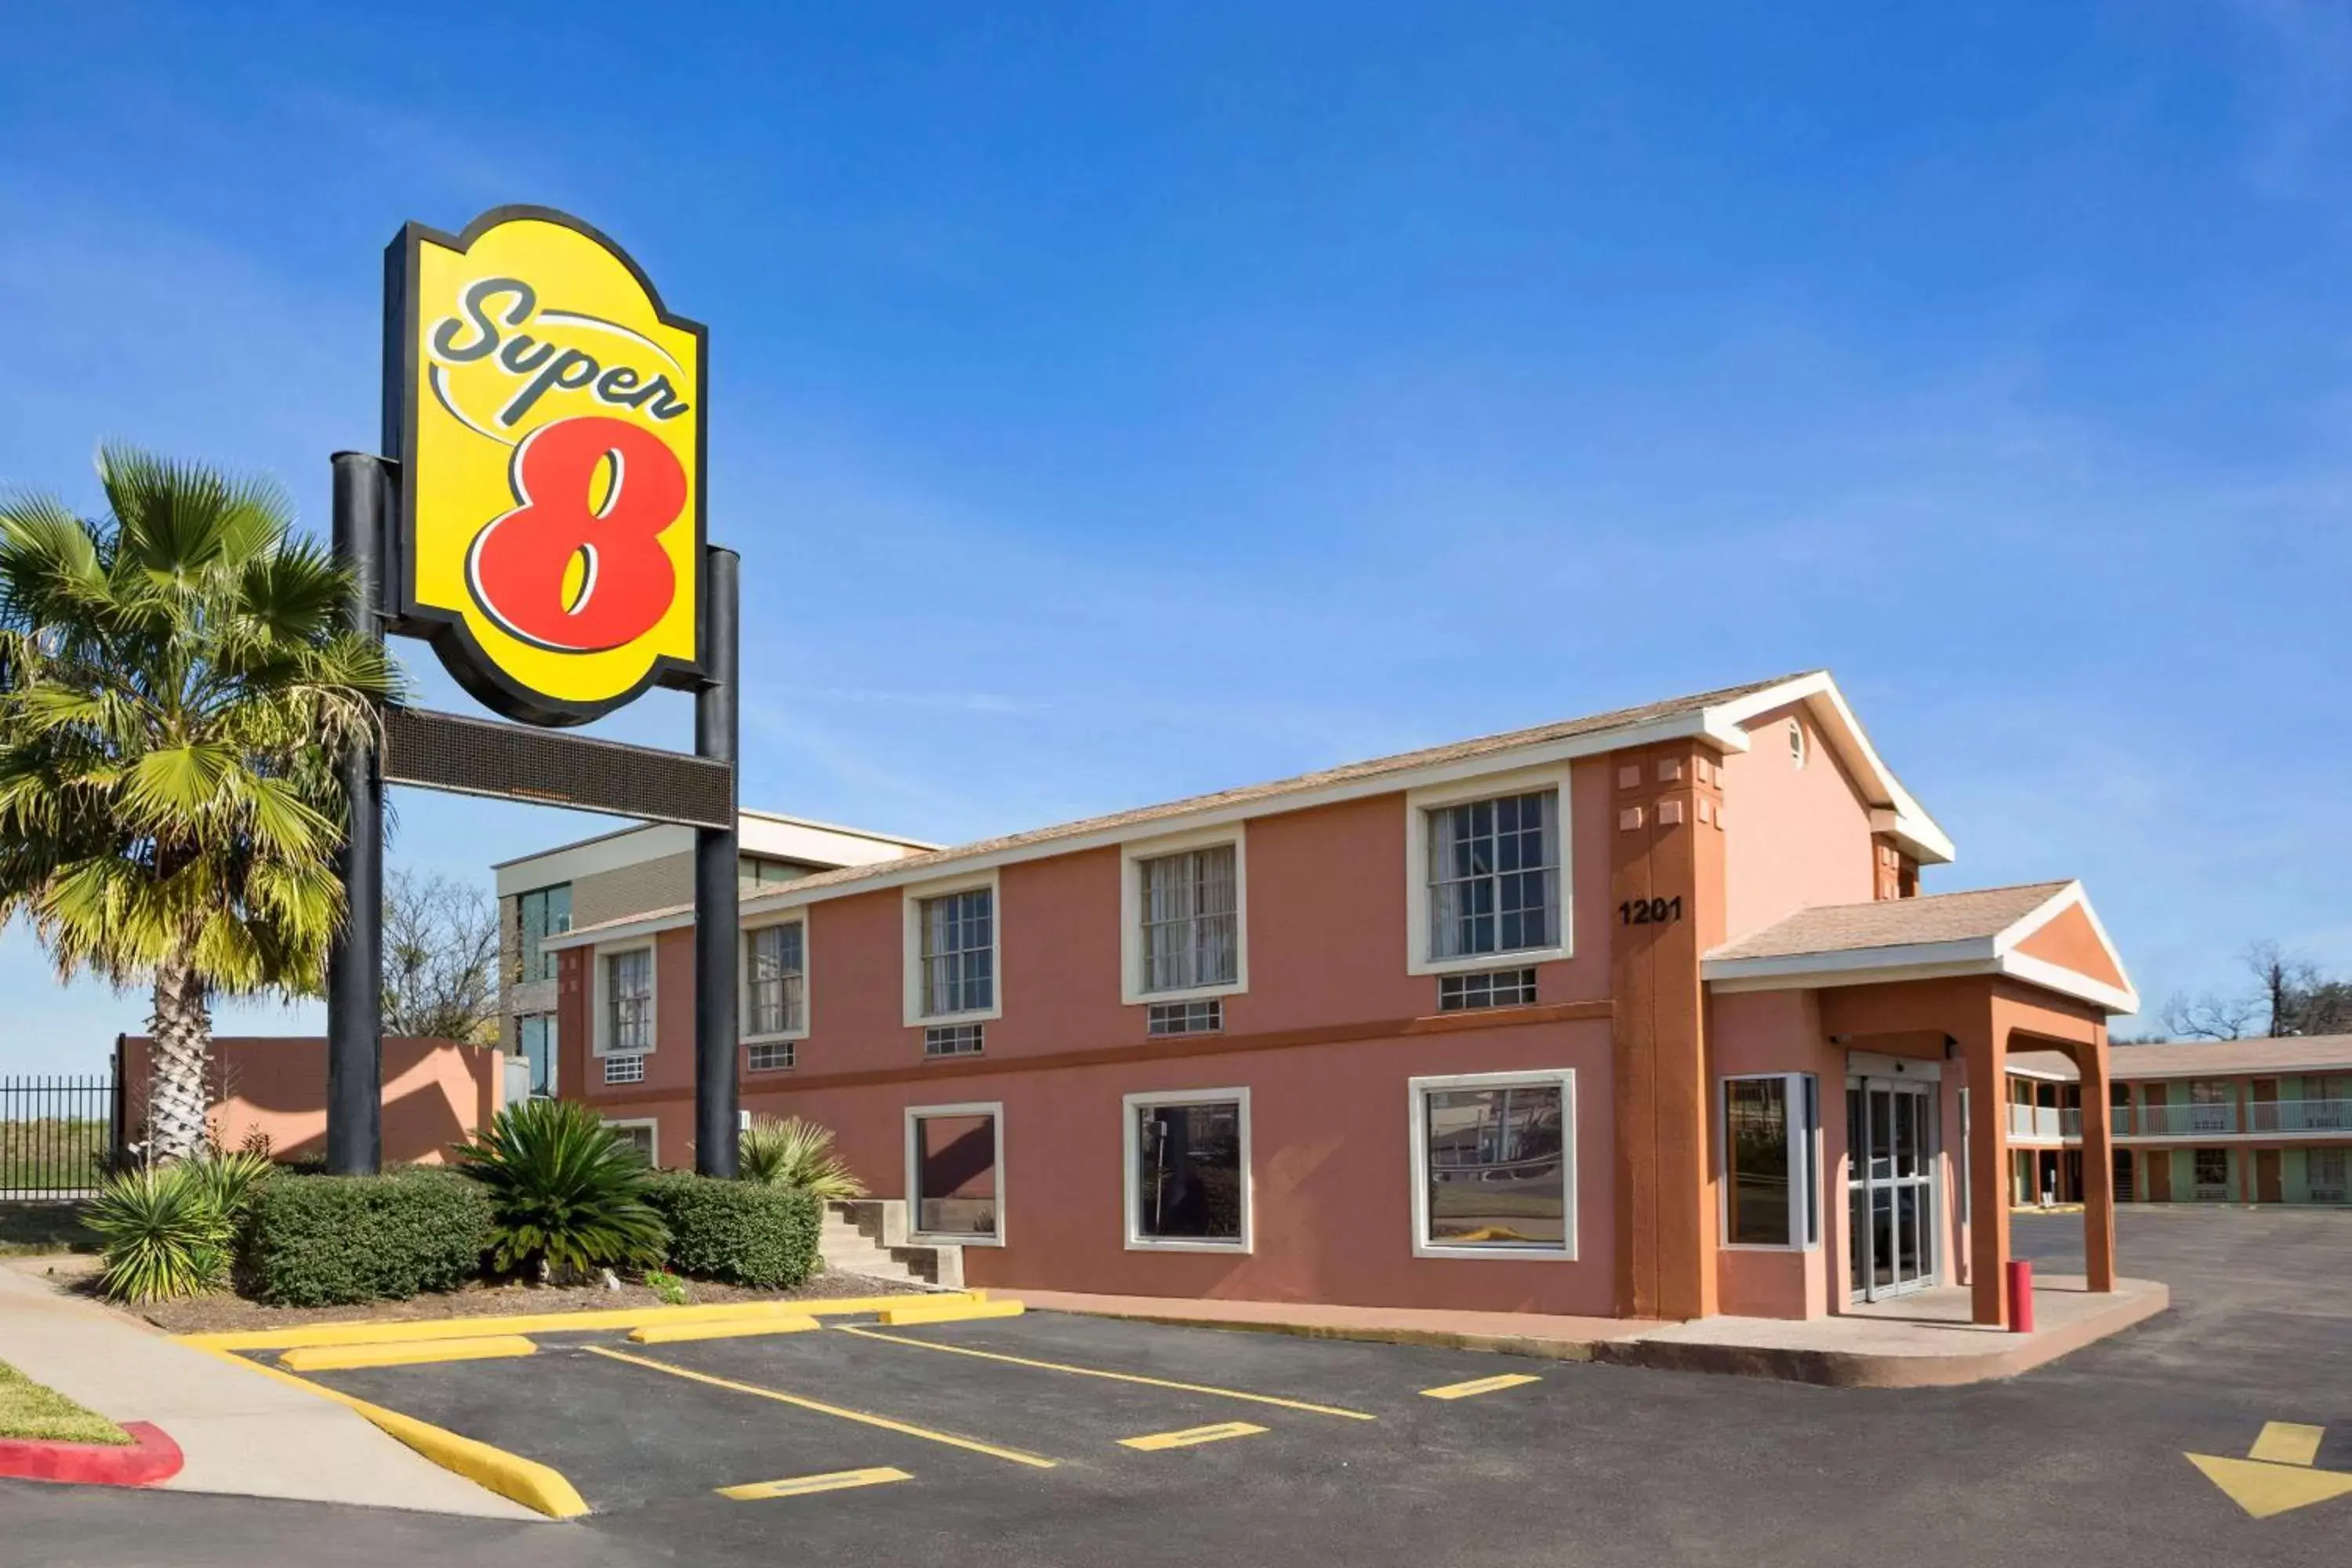 Property Building in Super 8 by Wyndham Austin Downtown/Capitol Area